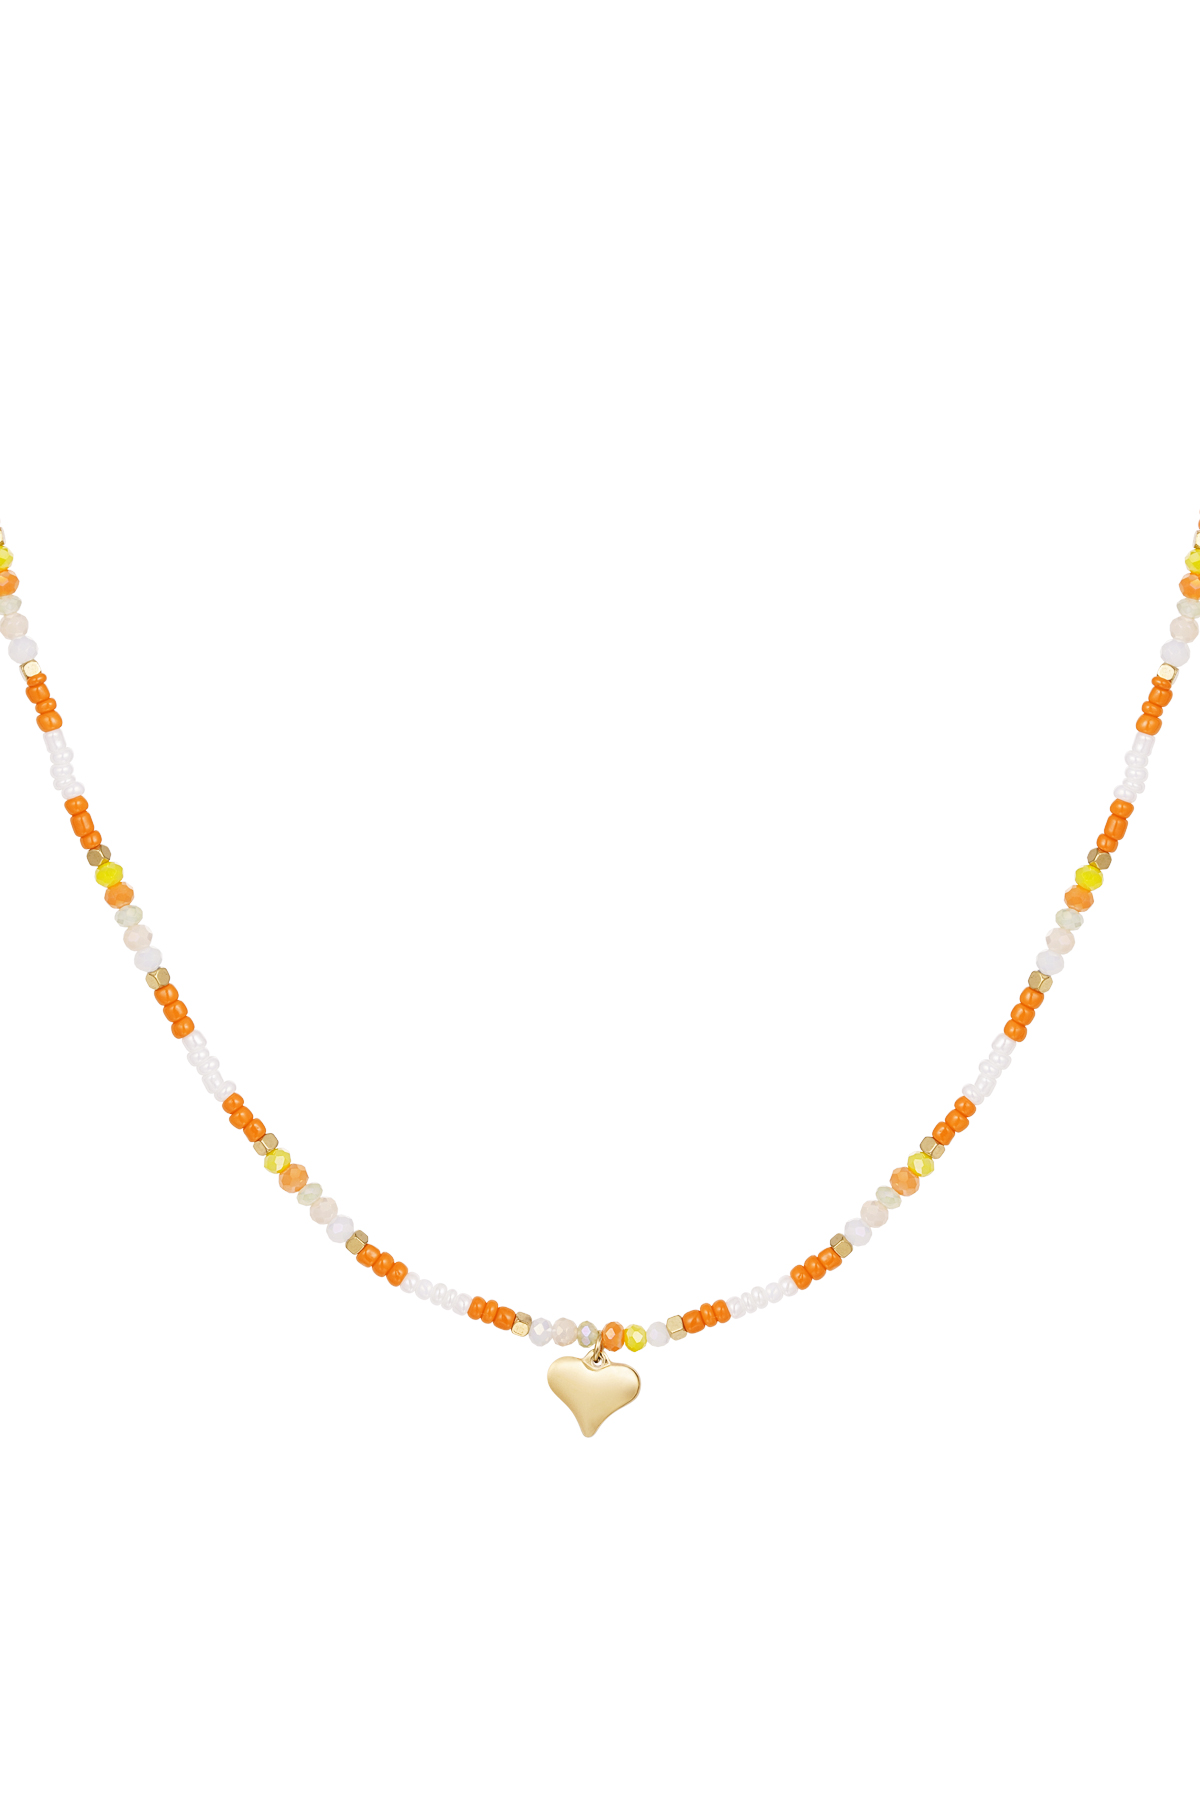 Colorful beaded necklace with heart charm - orange/multi